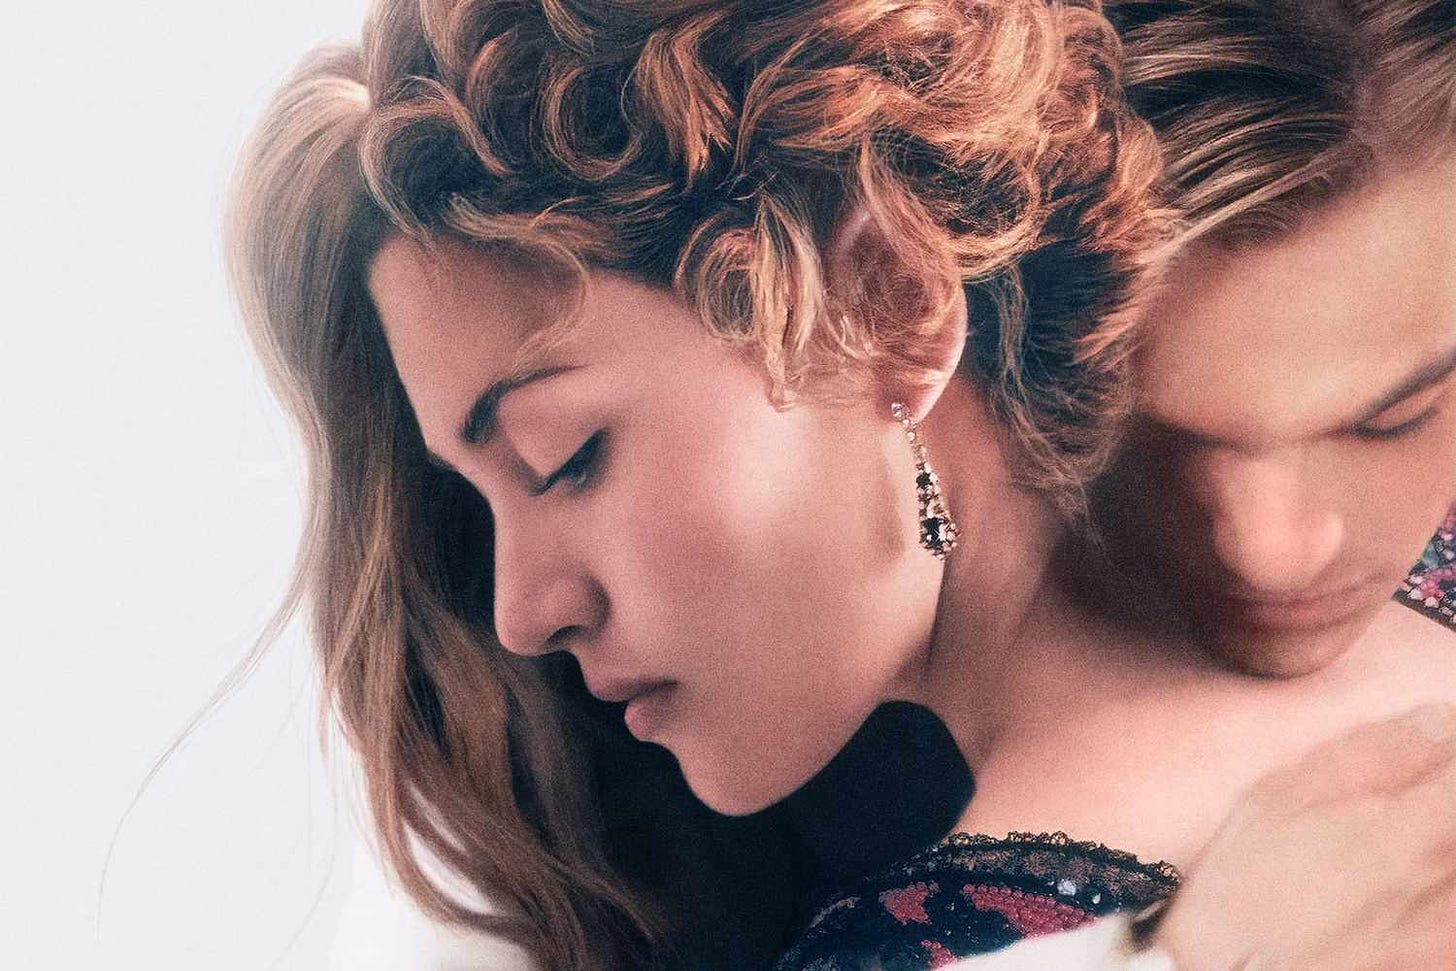 Titanic' Fans Question Kate Winslet's Hair in New Movie Poster